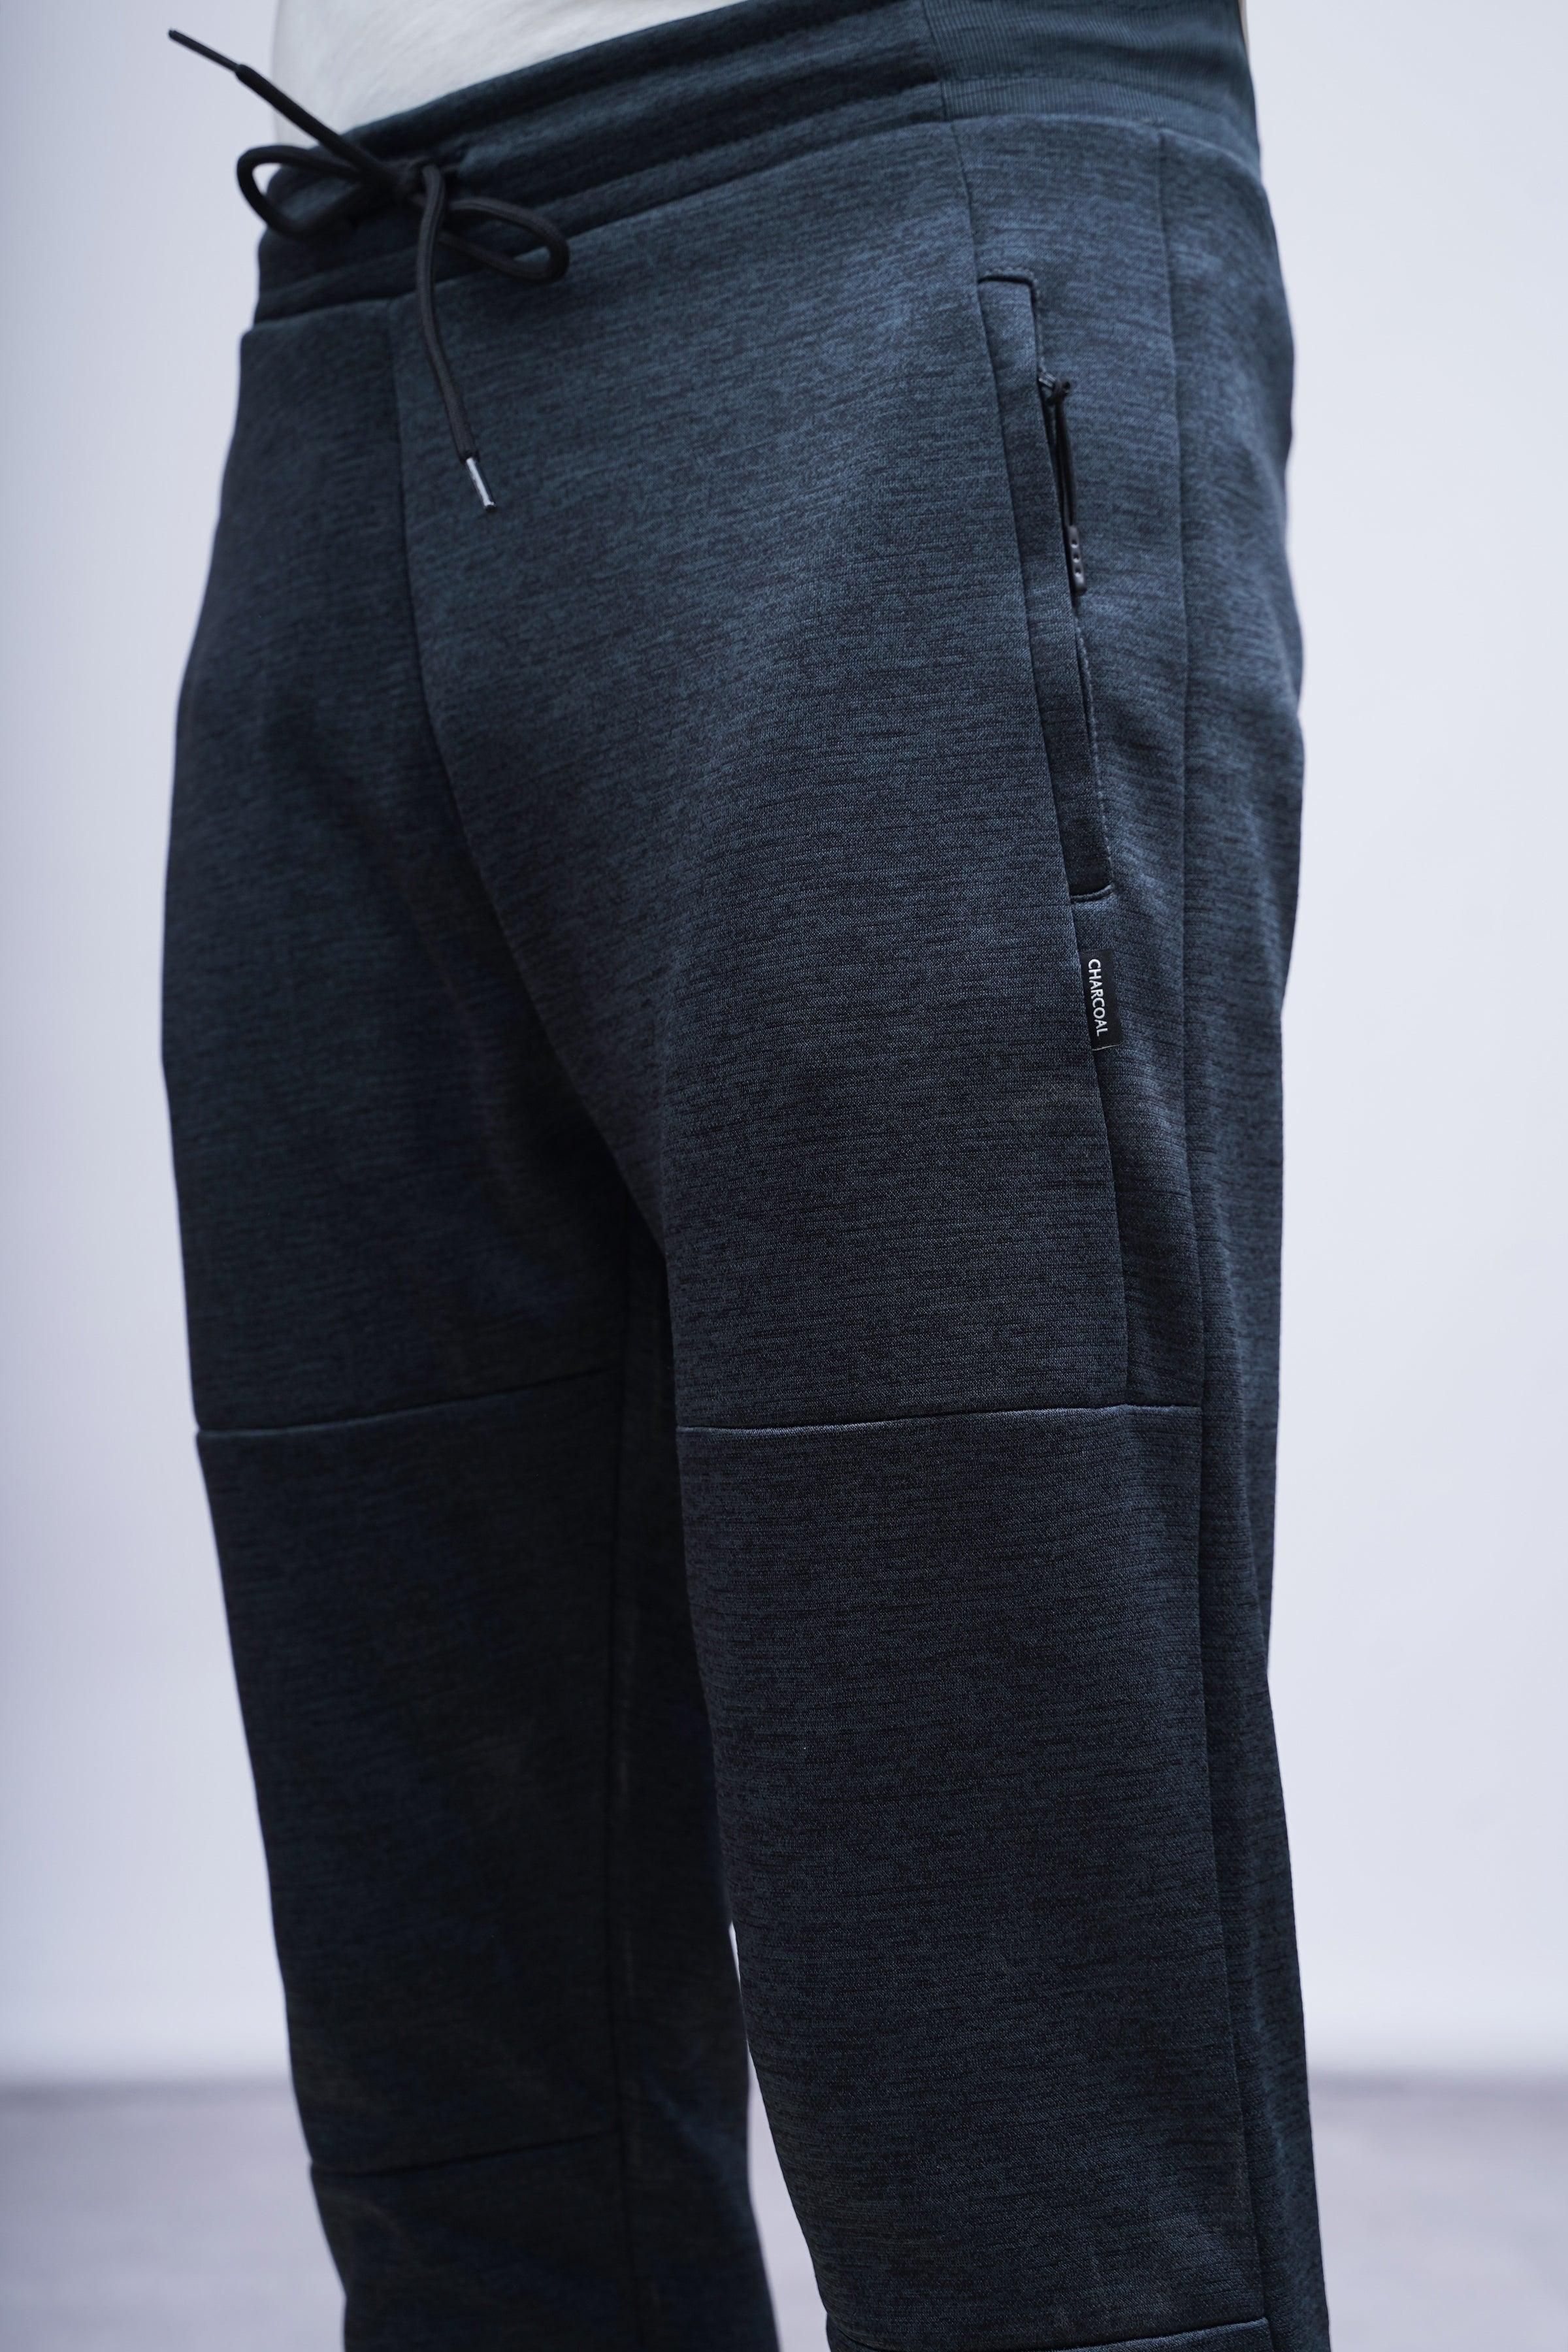 CHAIN YARN FLEECE TROUSER OLIVE MELANGE at Charcoal Clothing